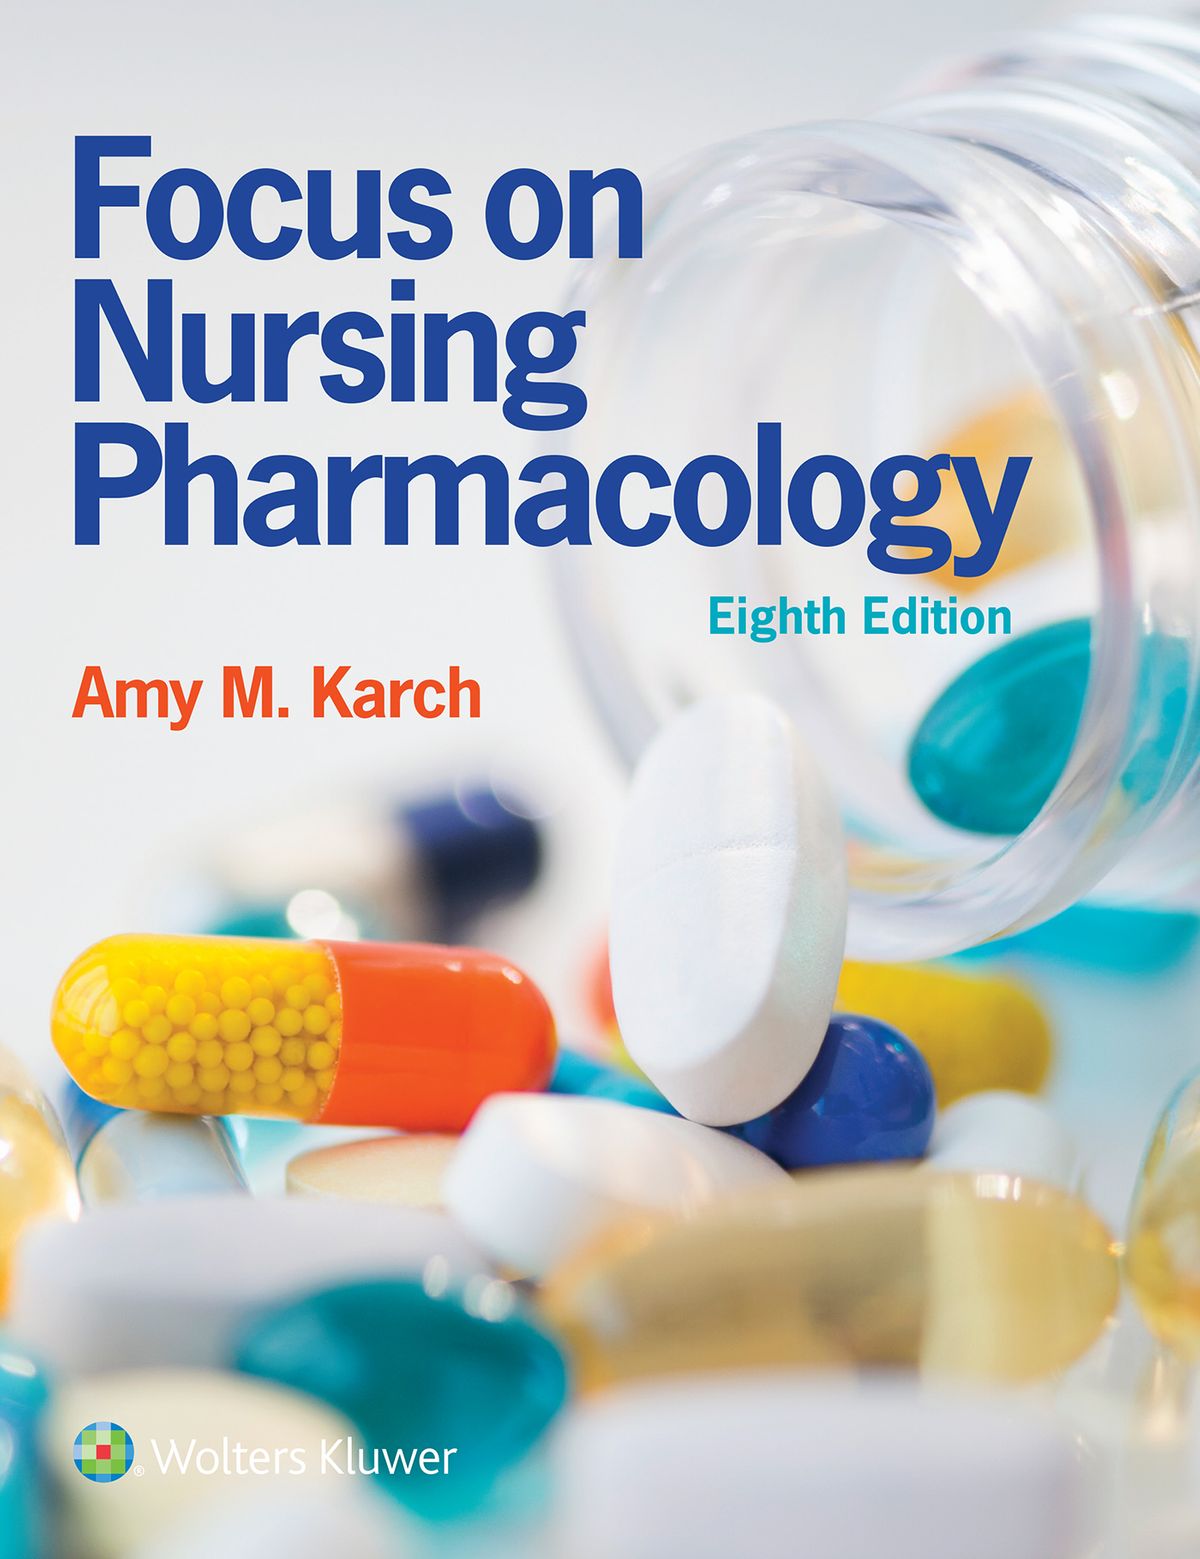 Notes: Focus on Nursing Pharmacology 8th Edition Ch. 46 Antianginal Agents